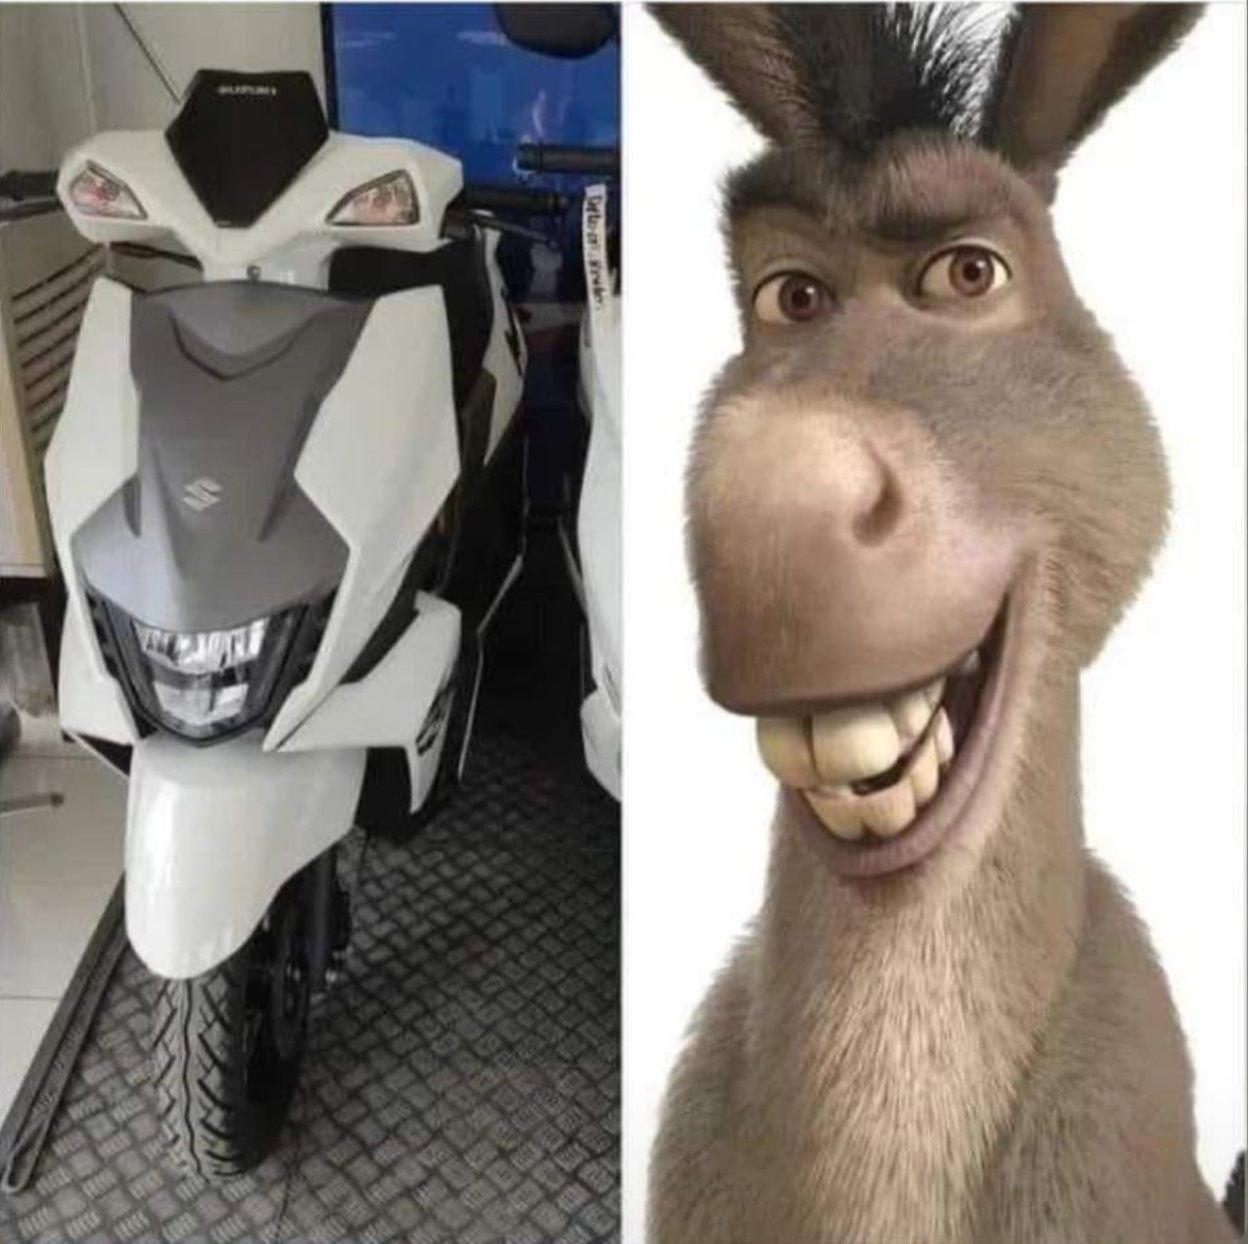 I can't unsee this now!